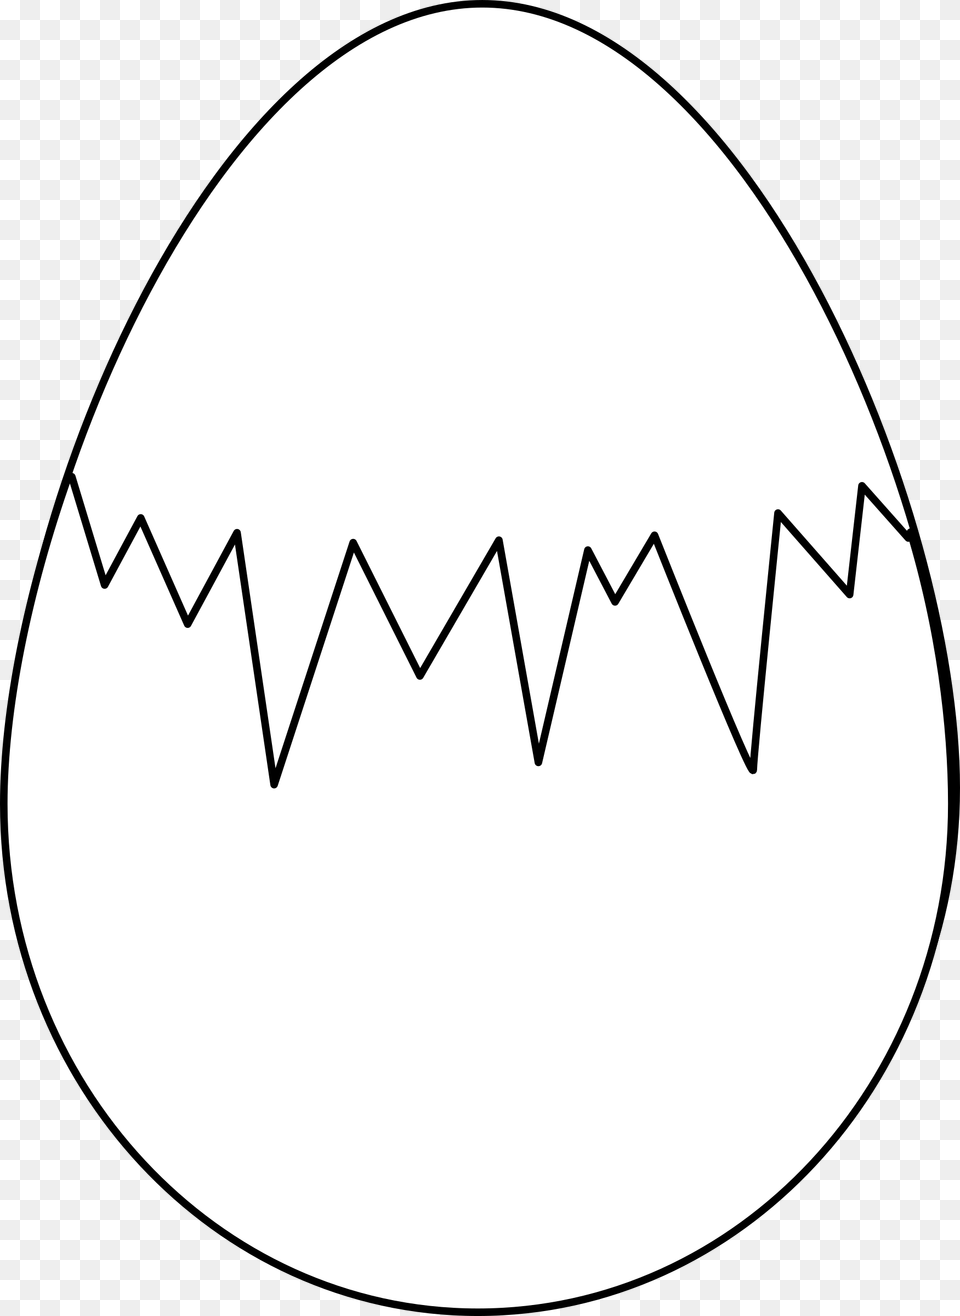 Egg Clipart Black And White Colouring Pages Of Egg, Food, Astronomy, Moon, Nature Free Png